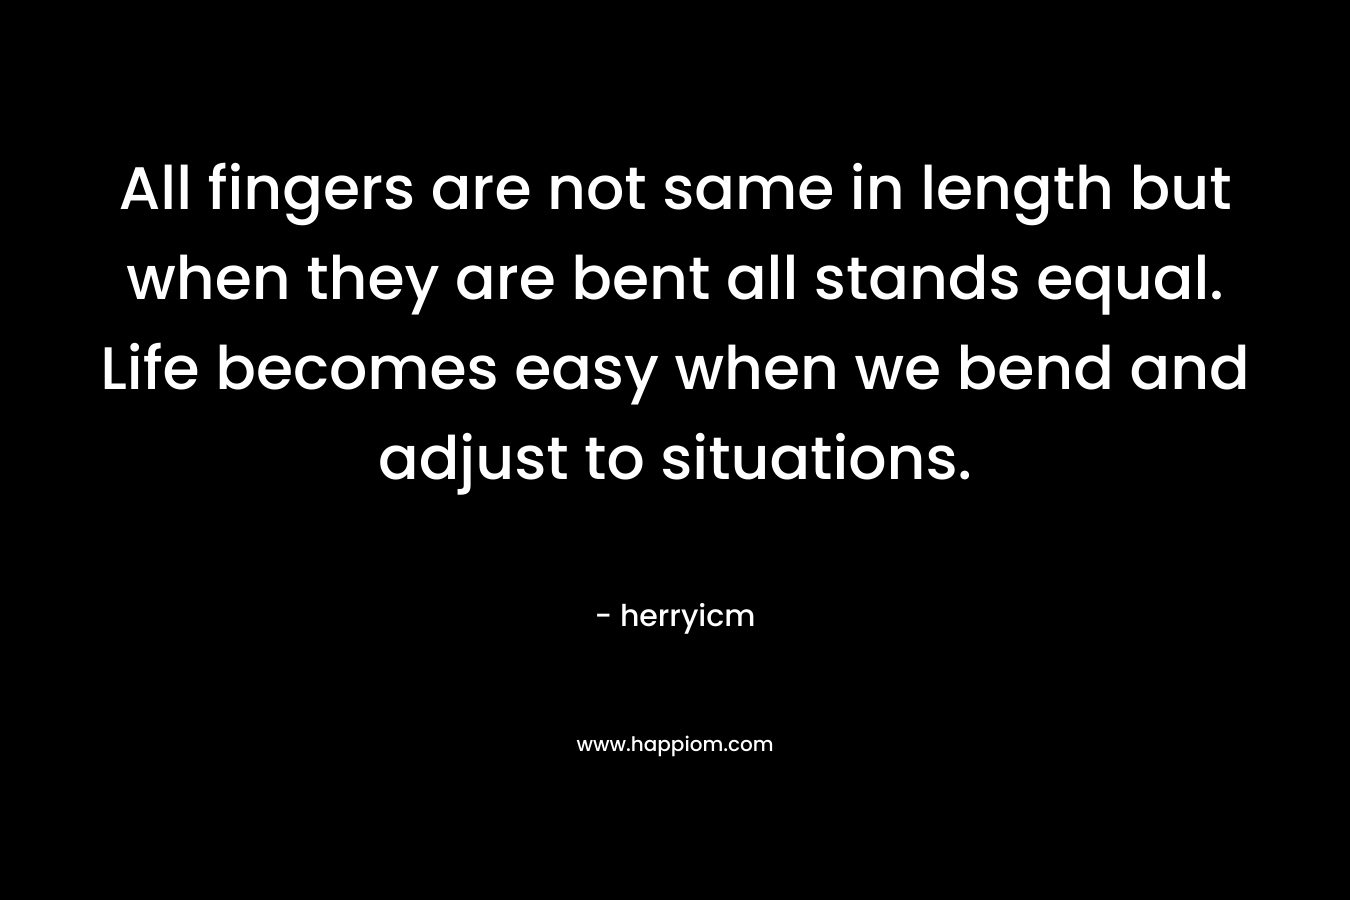 All fingers are not same in length but when they are bent all stands equal. Life becomes easy when we bend and adjust to situations.